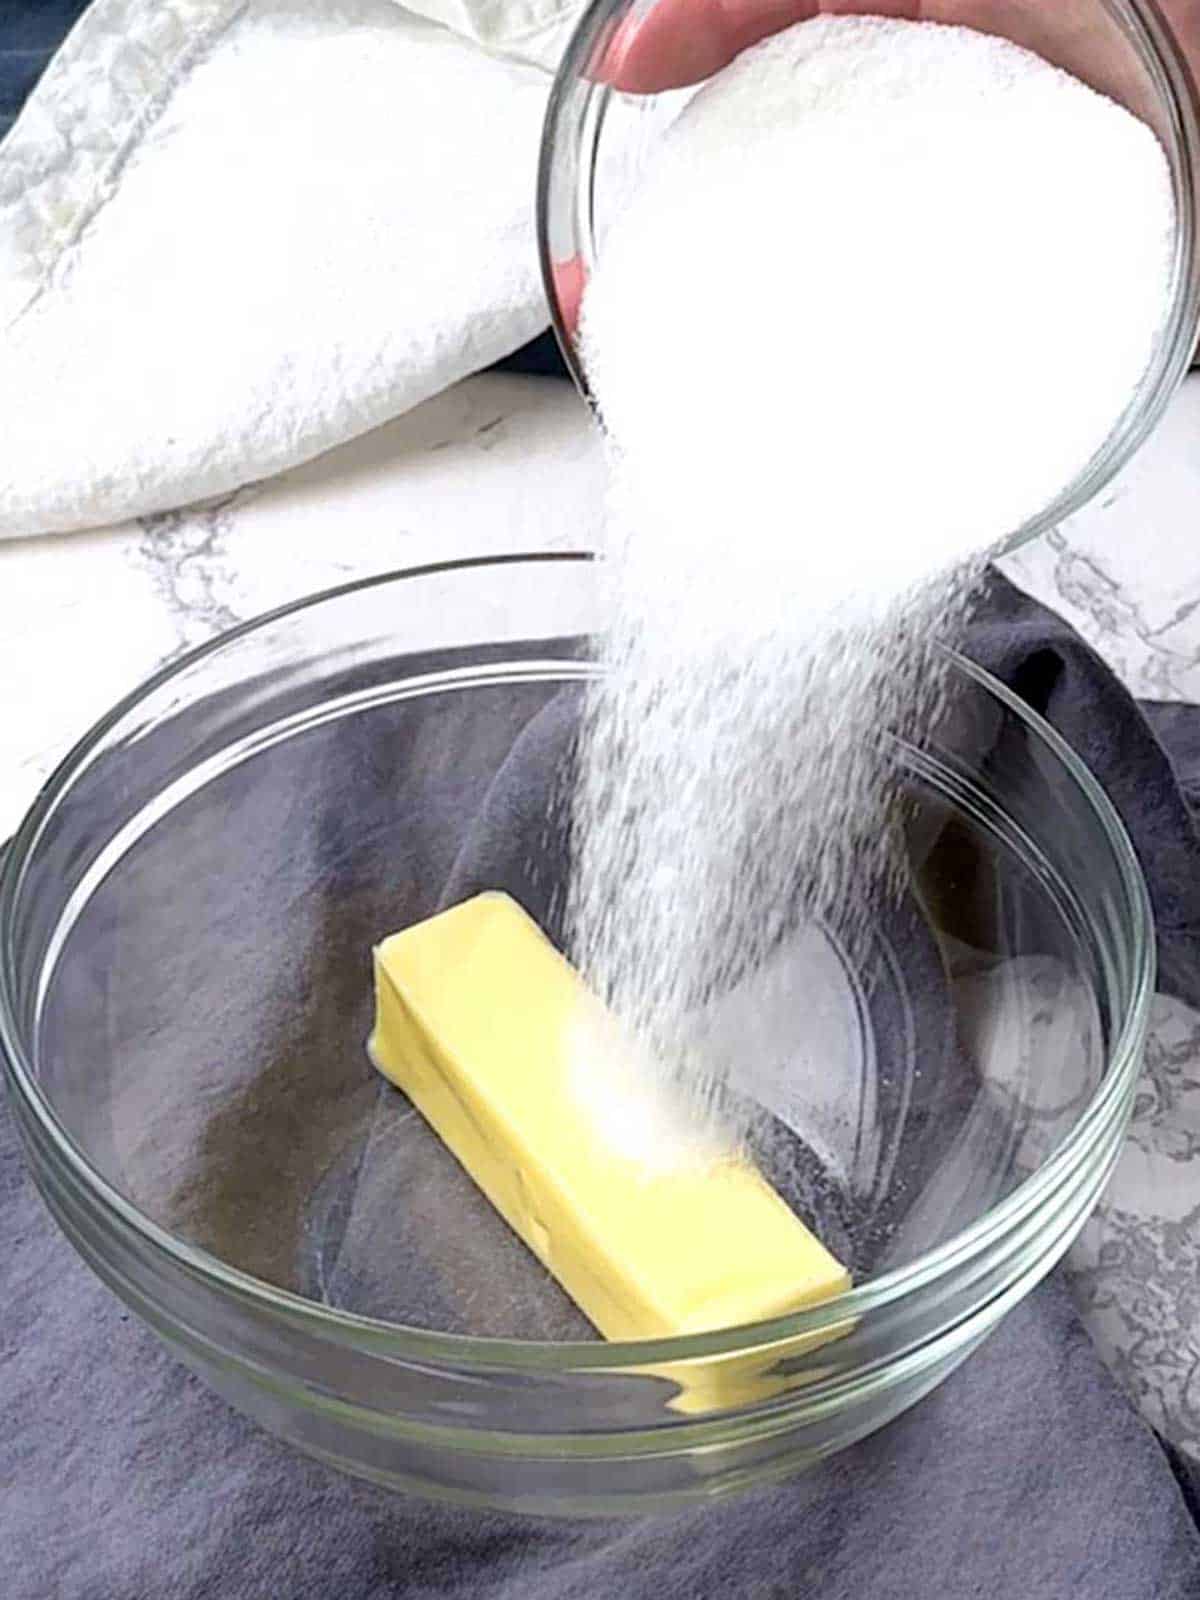 Adding sugar to butter in a bowl.